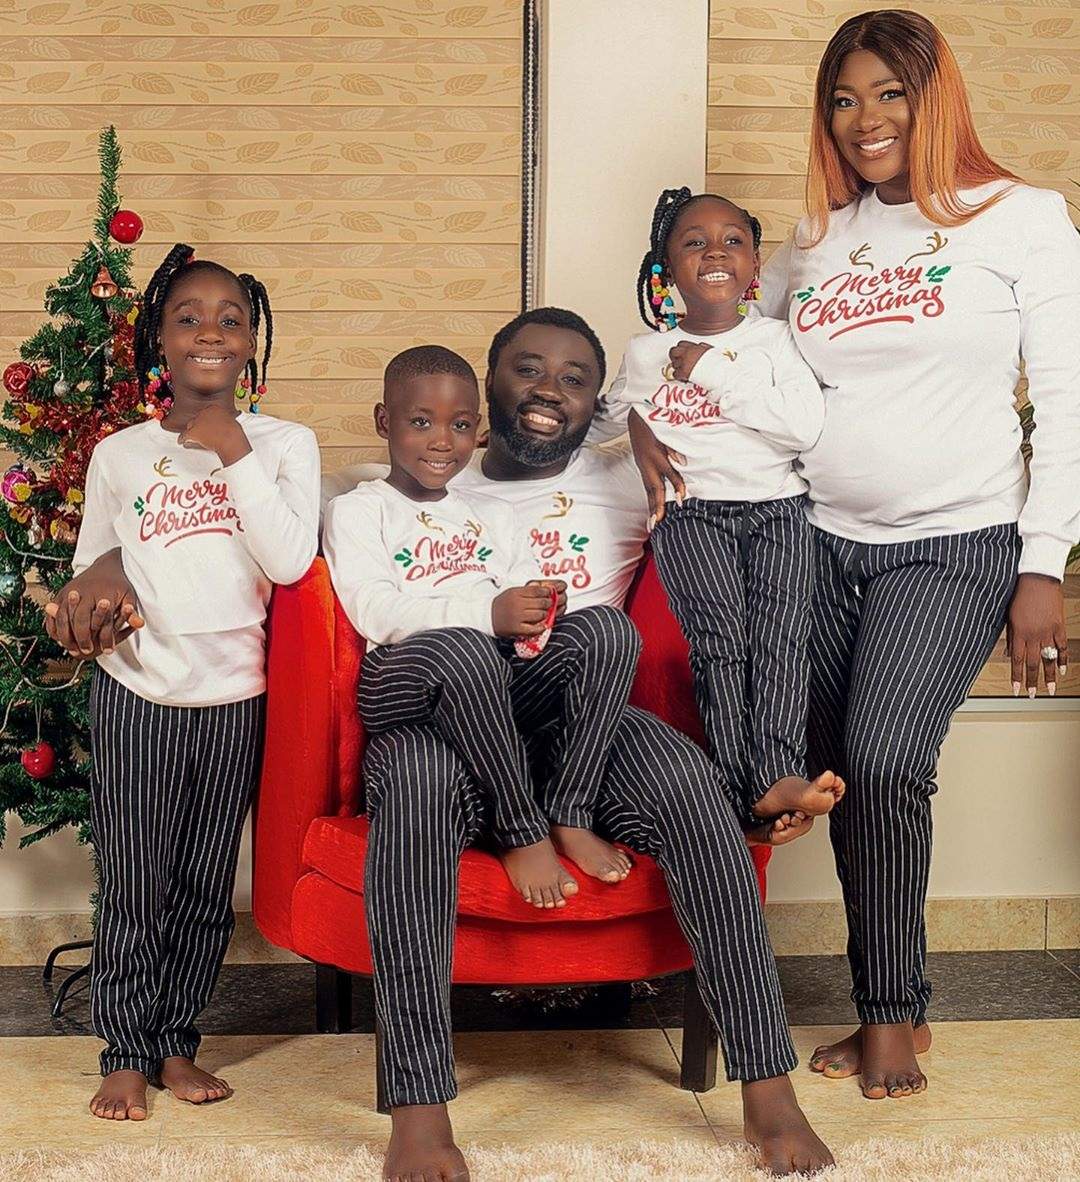 Mercy Johnson shares beautiful Christmas photo with her family